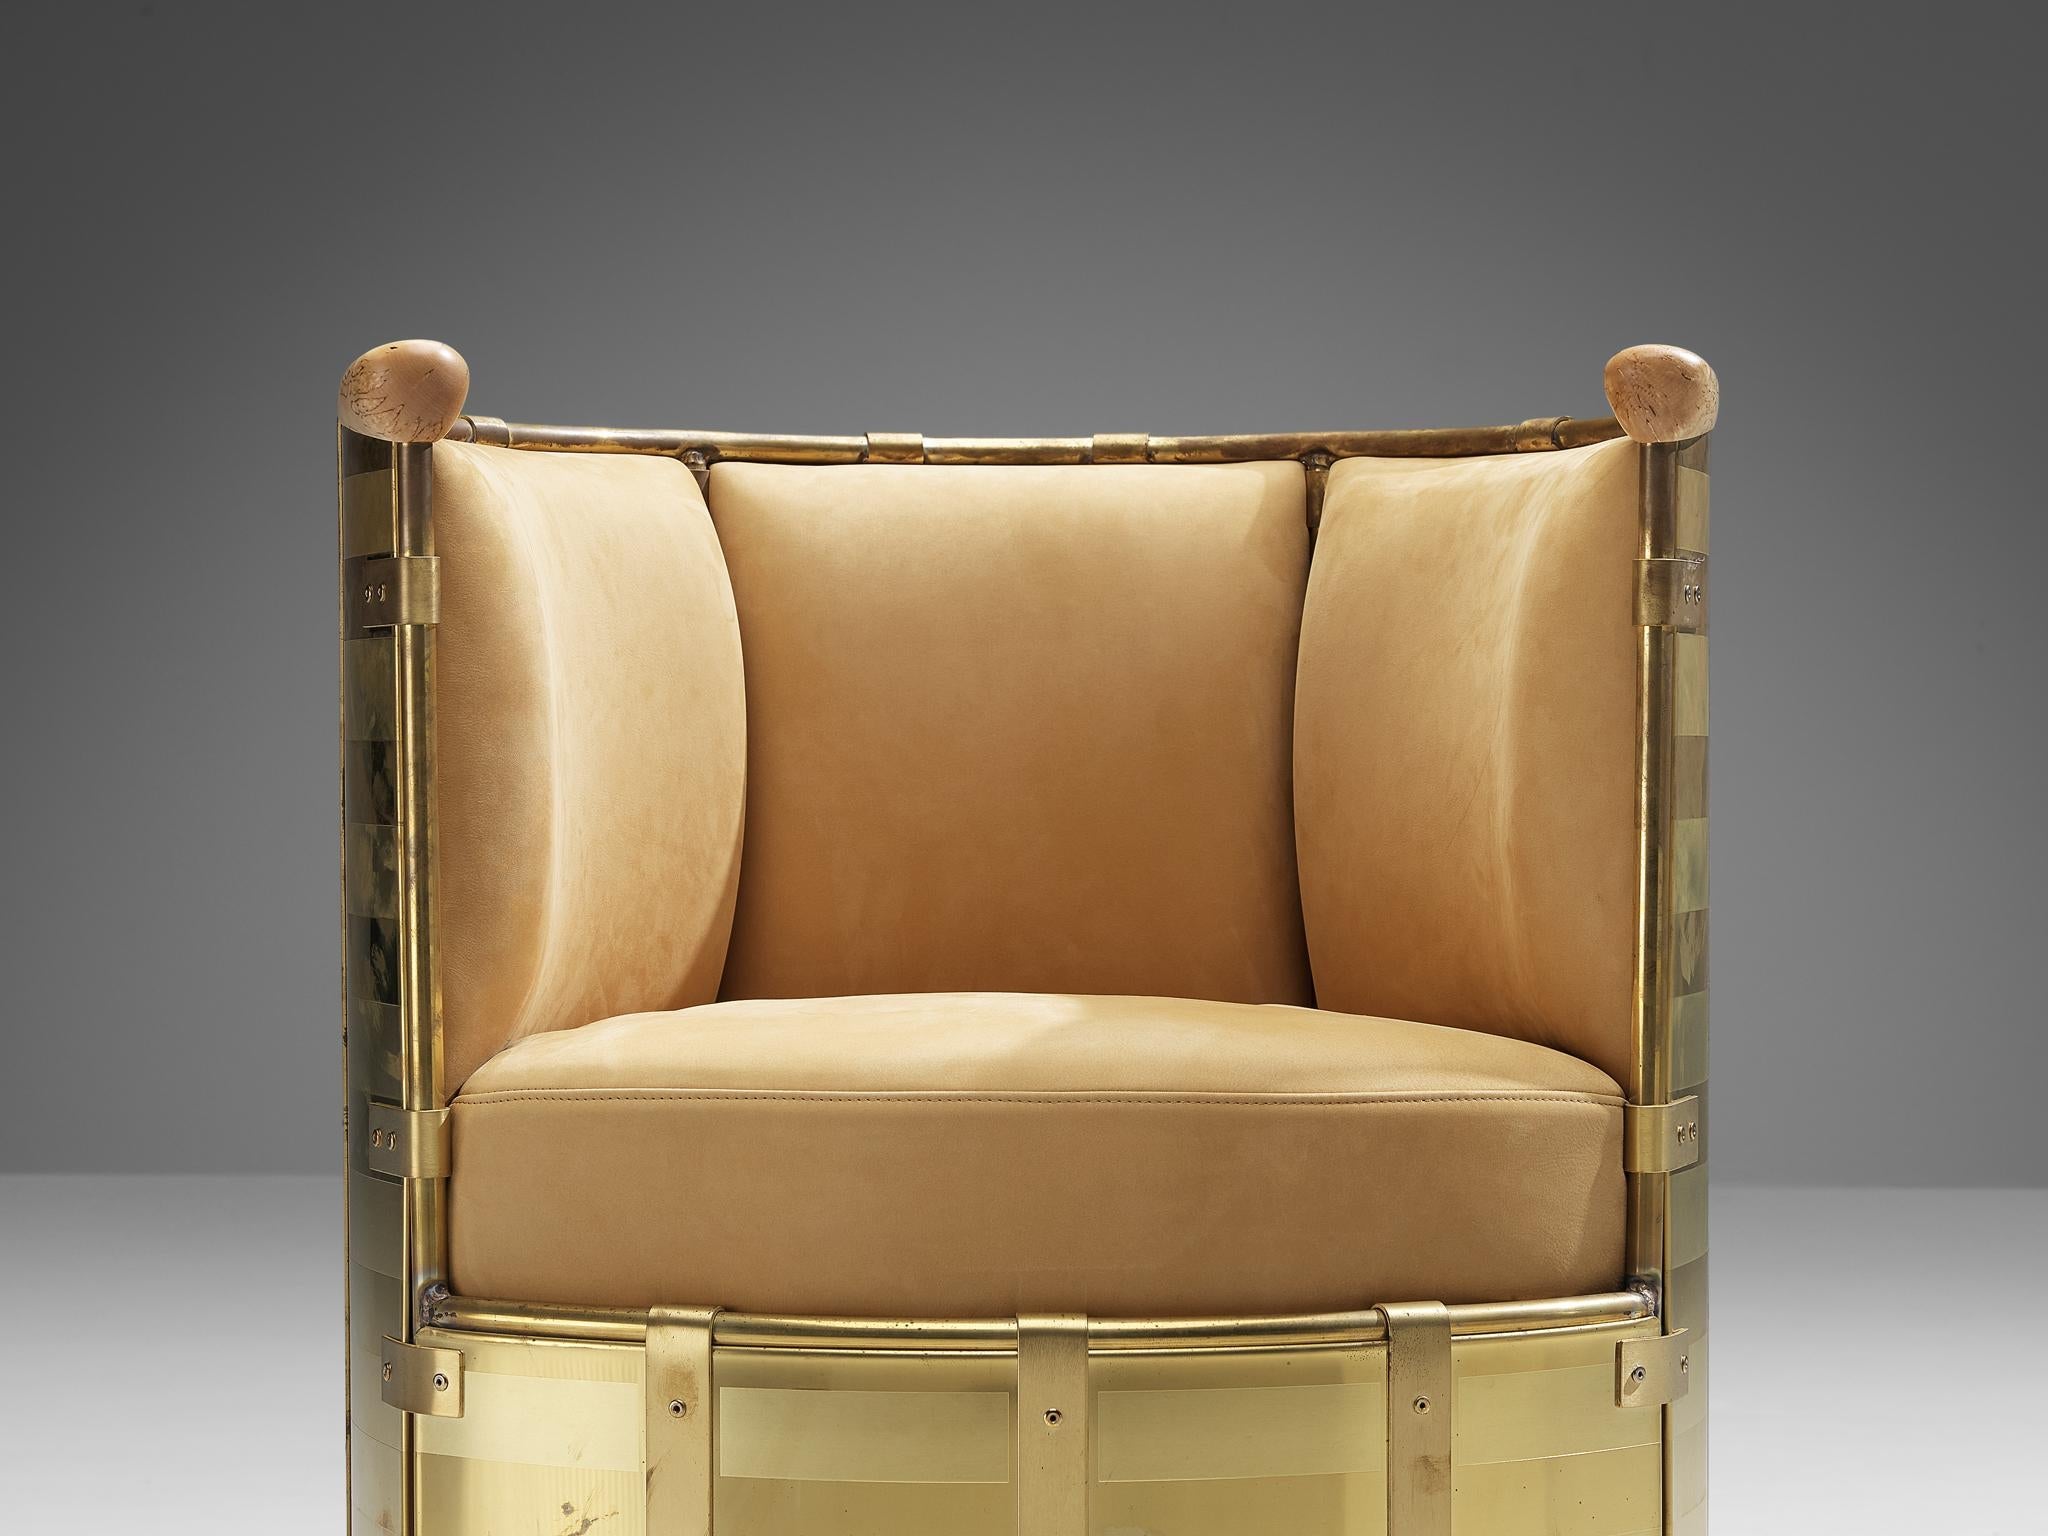 Mats Theselius for Källemo AB Limited Edition Lounge Chair 'El Dorado'